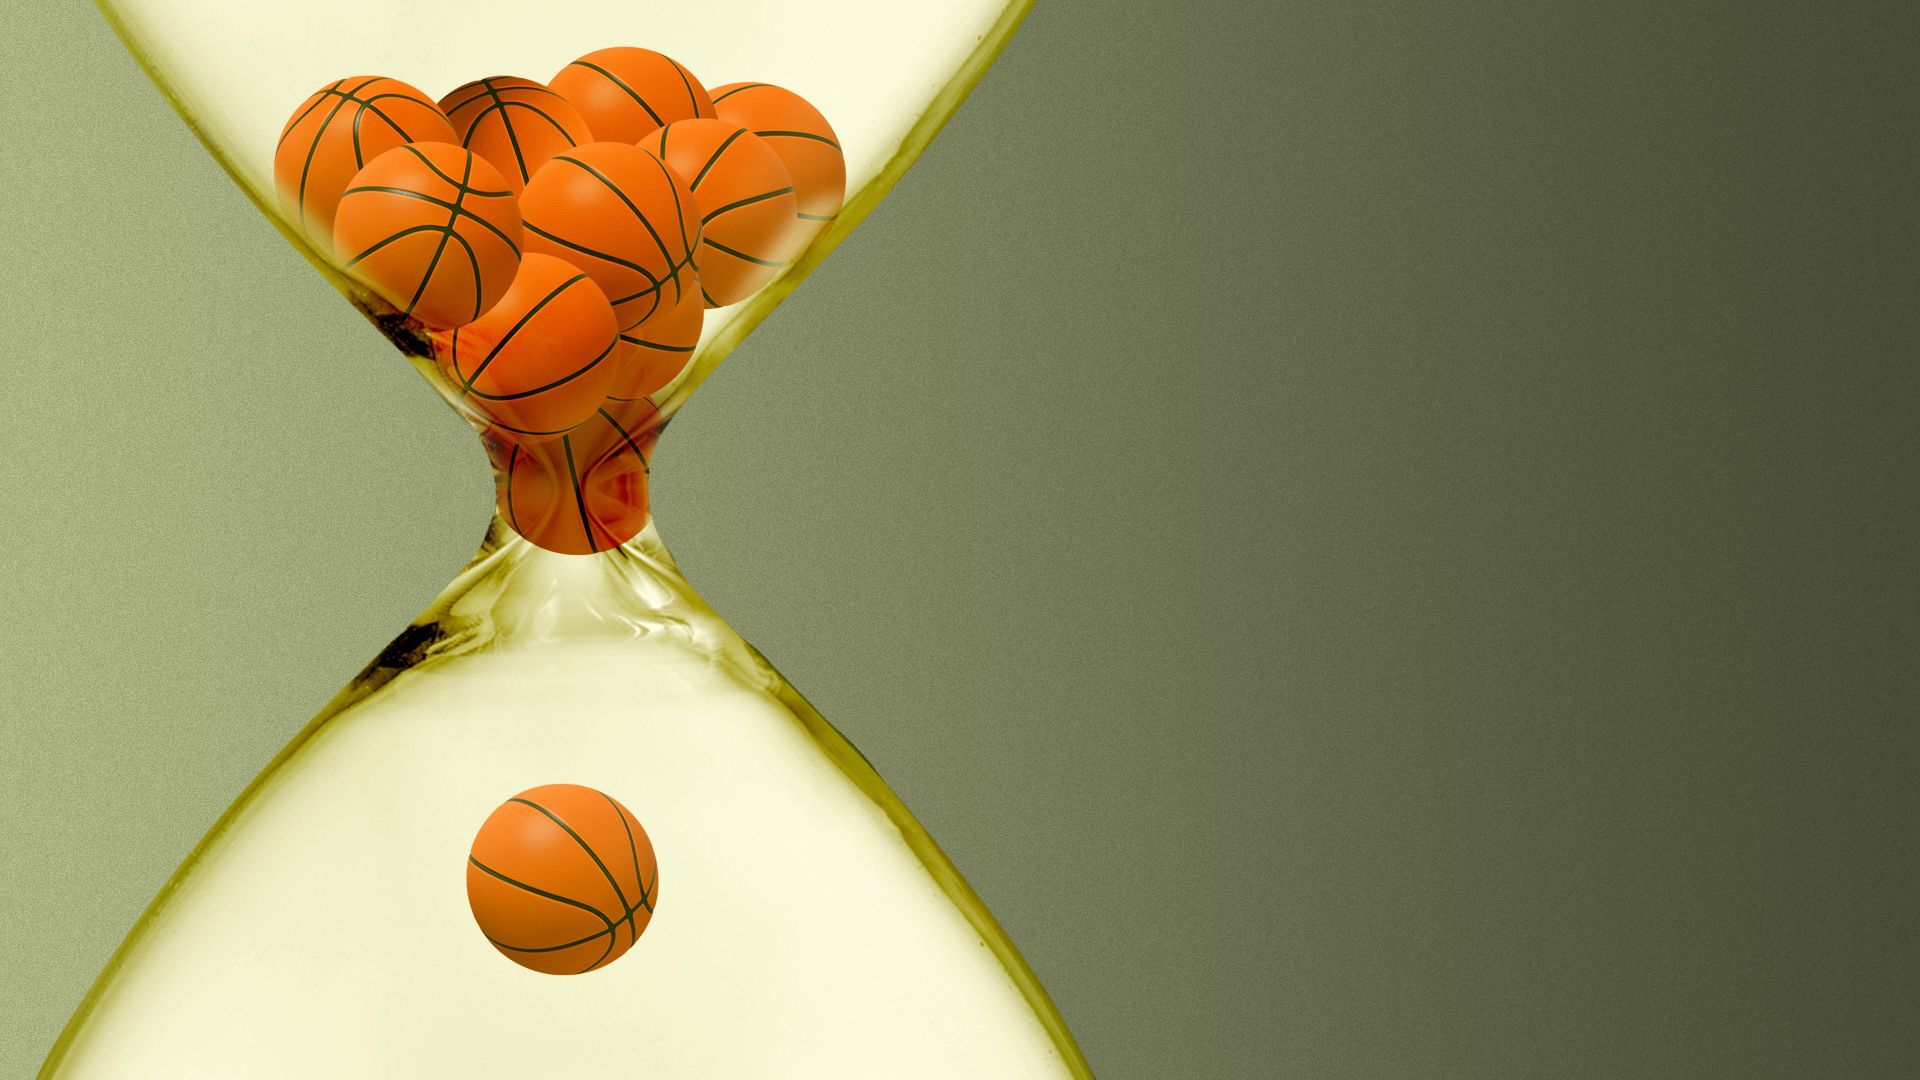 Illustration of an hourglass filled with basketballs instead of sand.